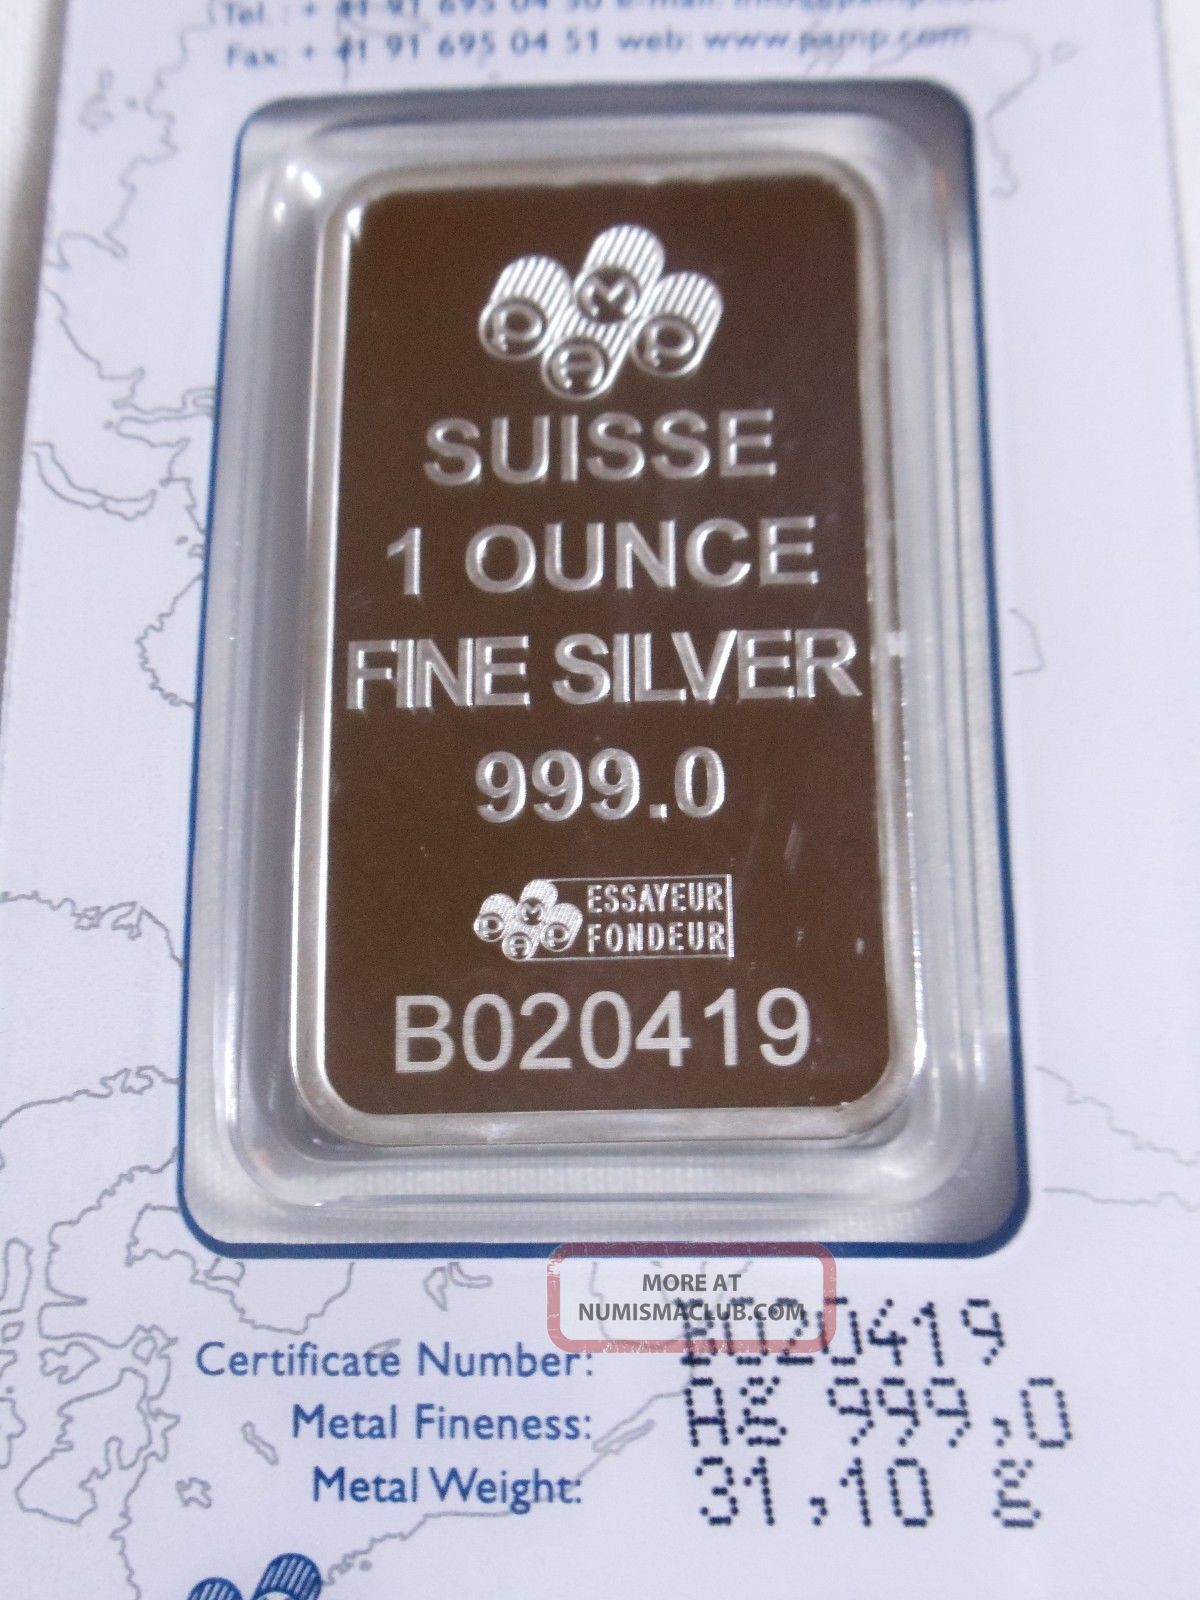 1 Oz Pamp Suisse Silver Bar (w/ Assay) 999. 0 Pure Silver